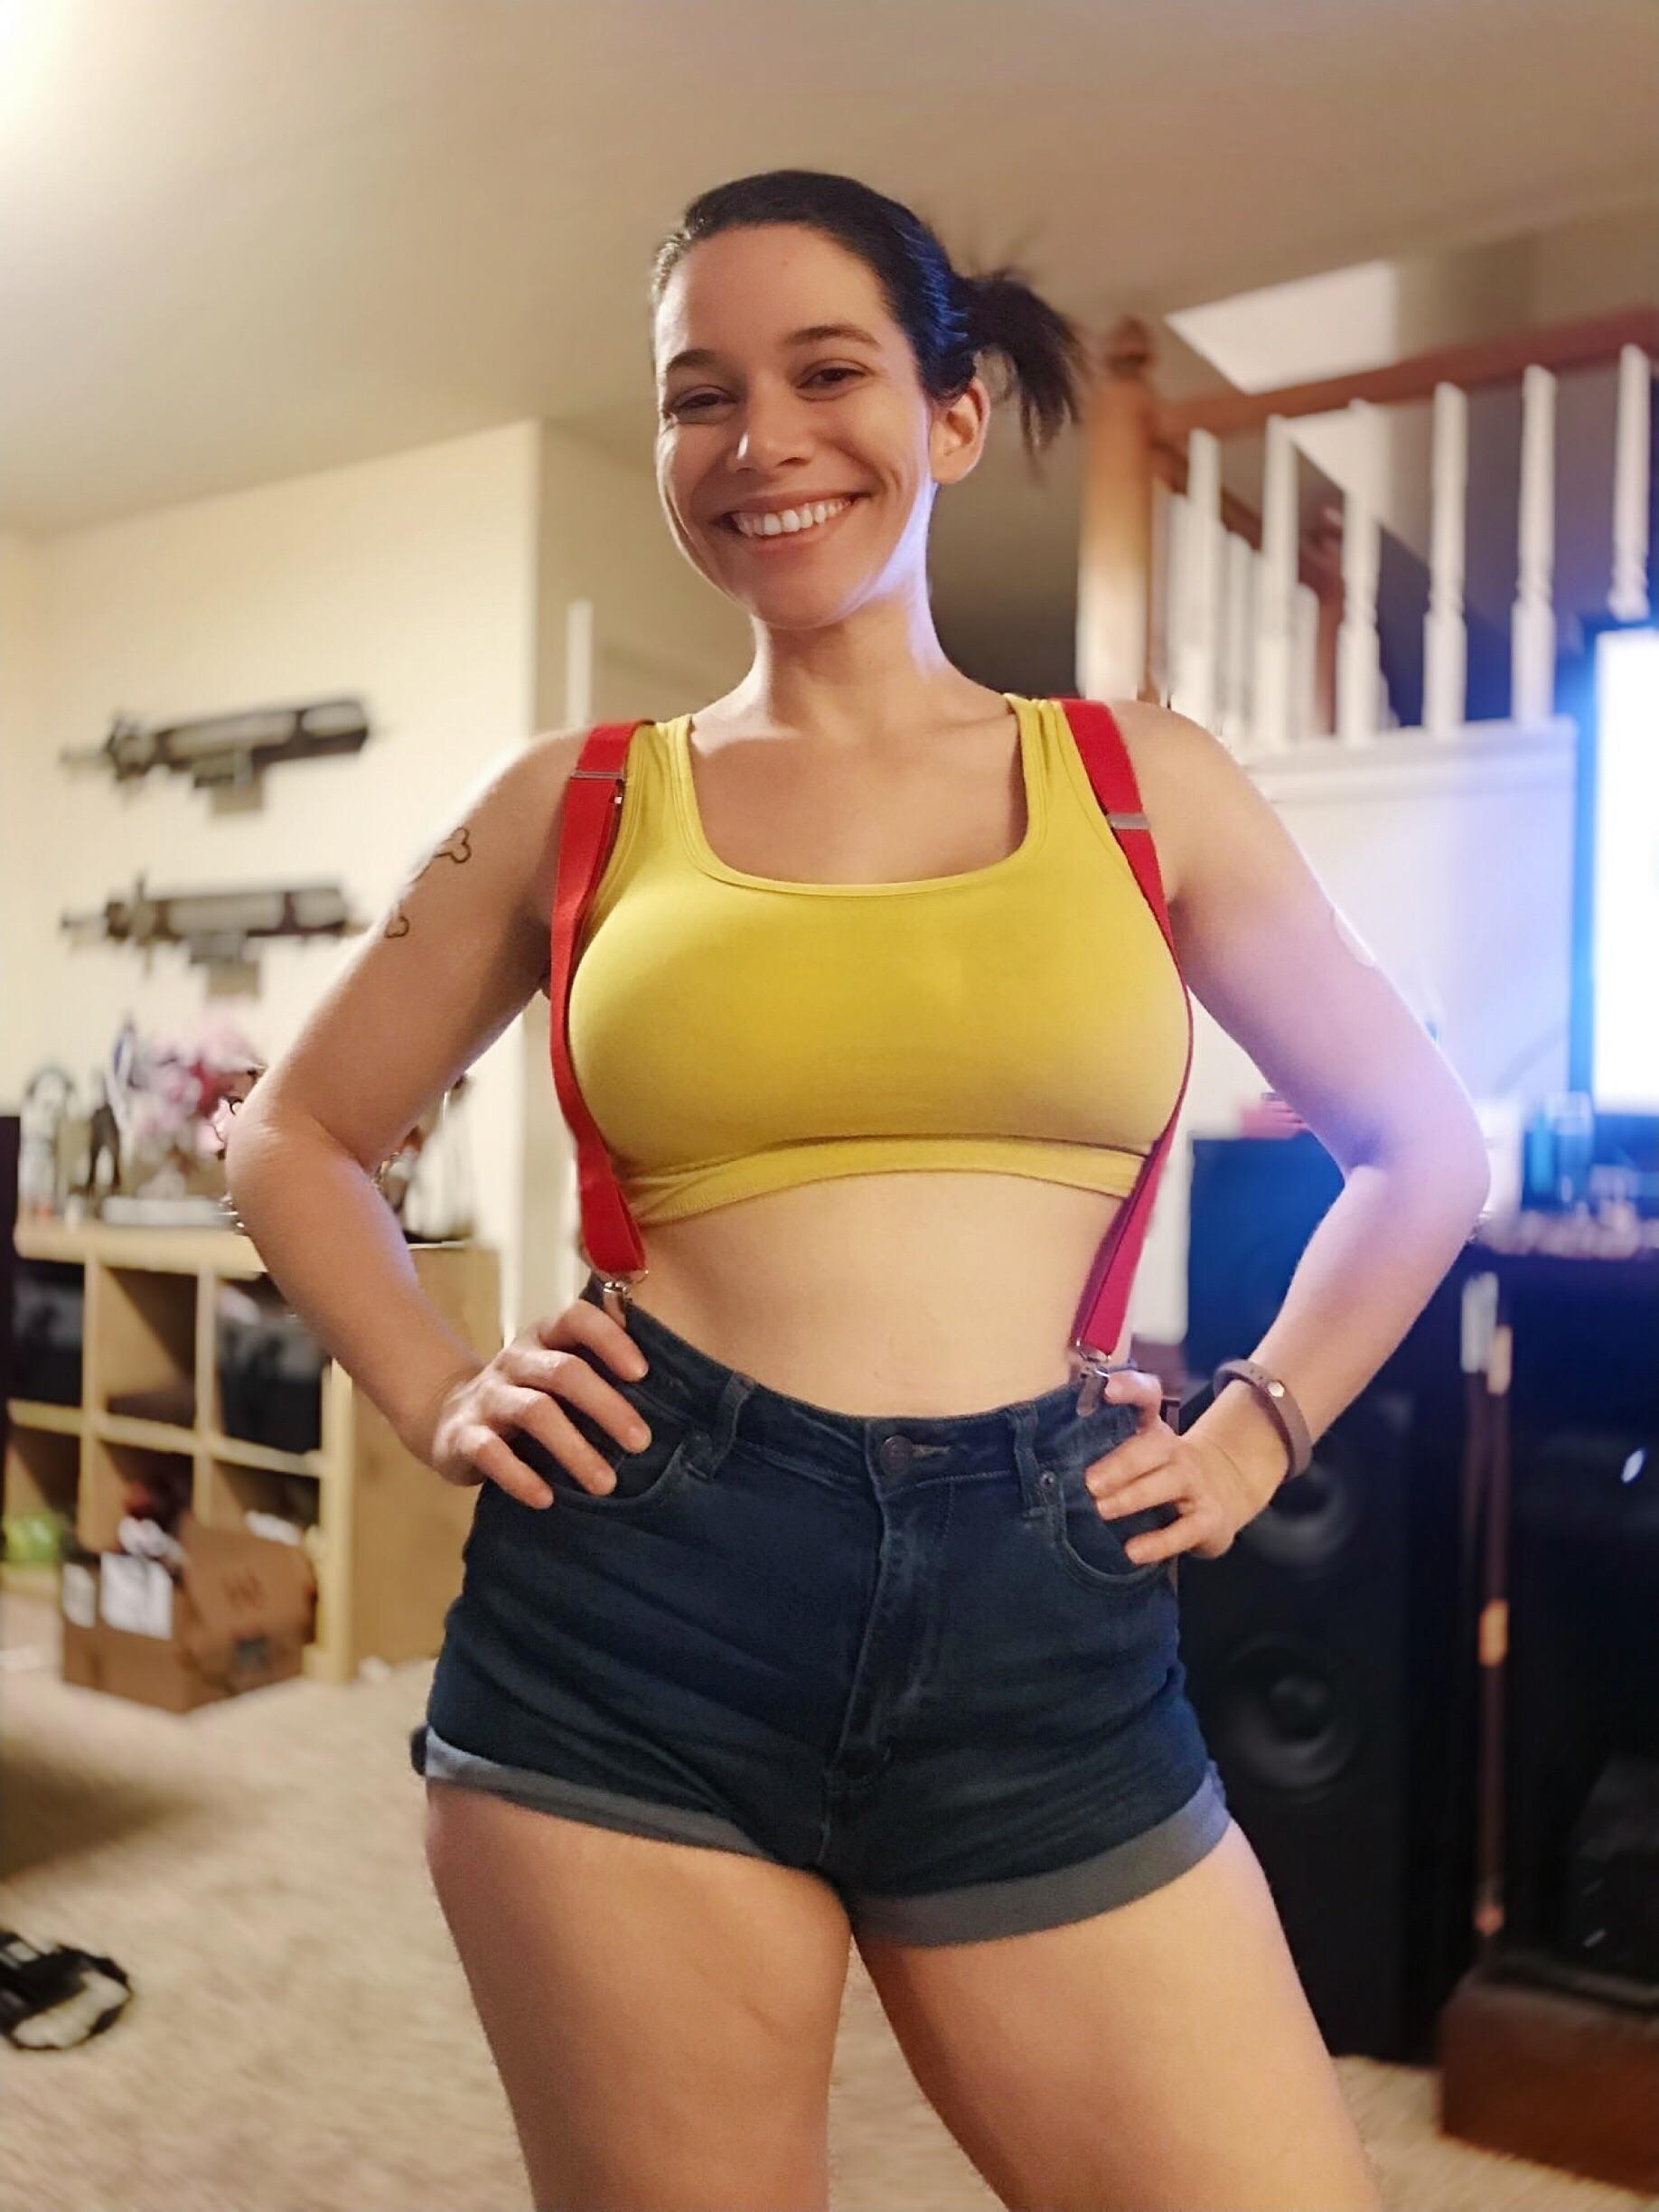 Irst Full Cosplay I Have! Simple Yet Effective I Hope! Misty By Brooklyn Springvalley